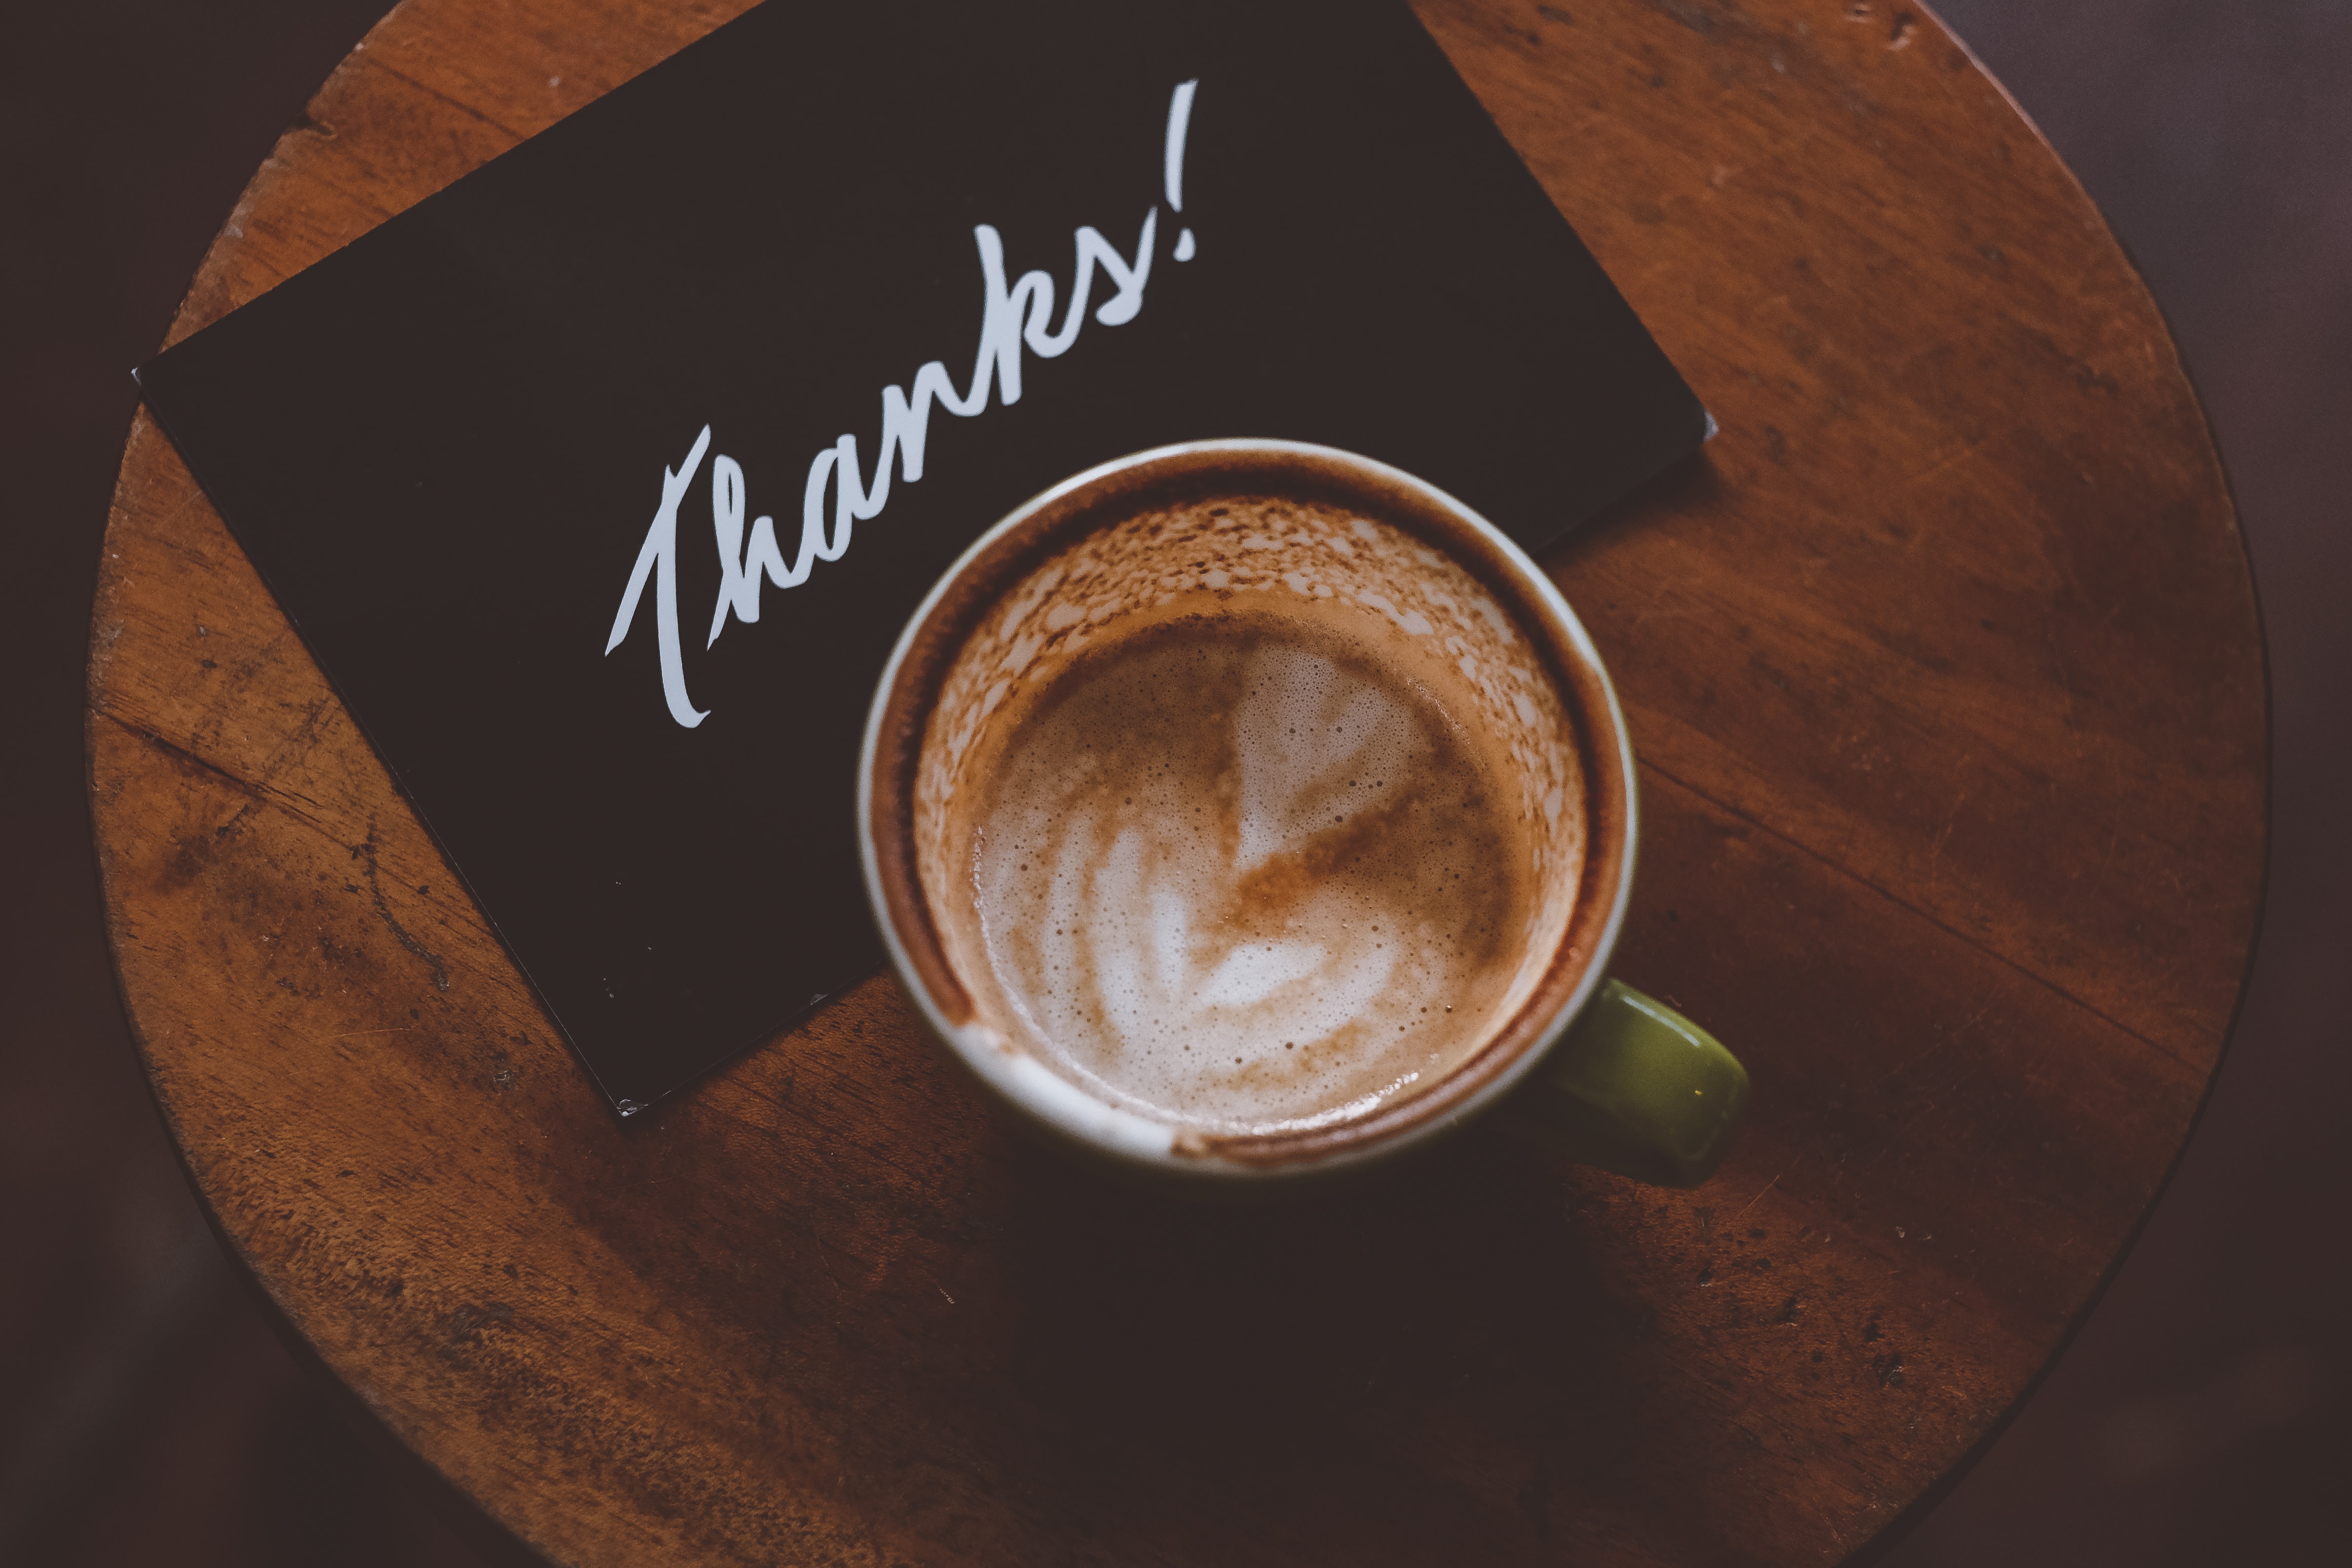 Coffee with a "thanks" sign